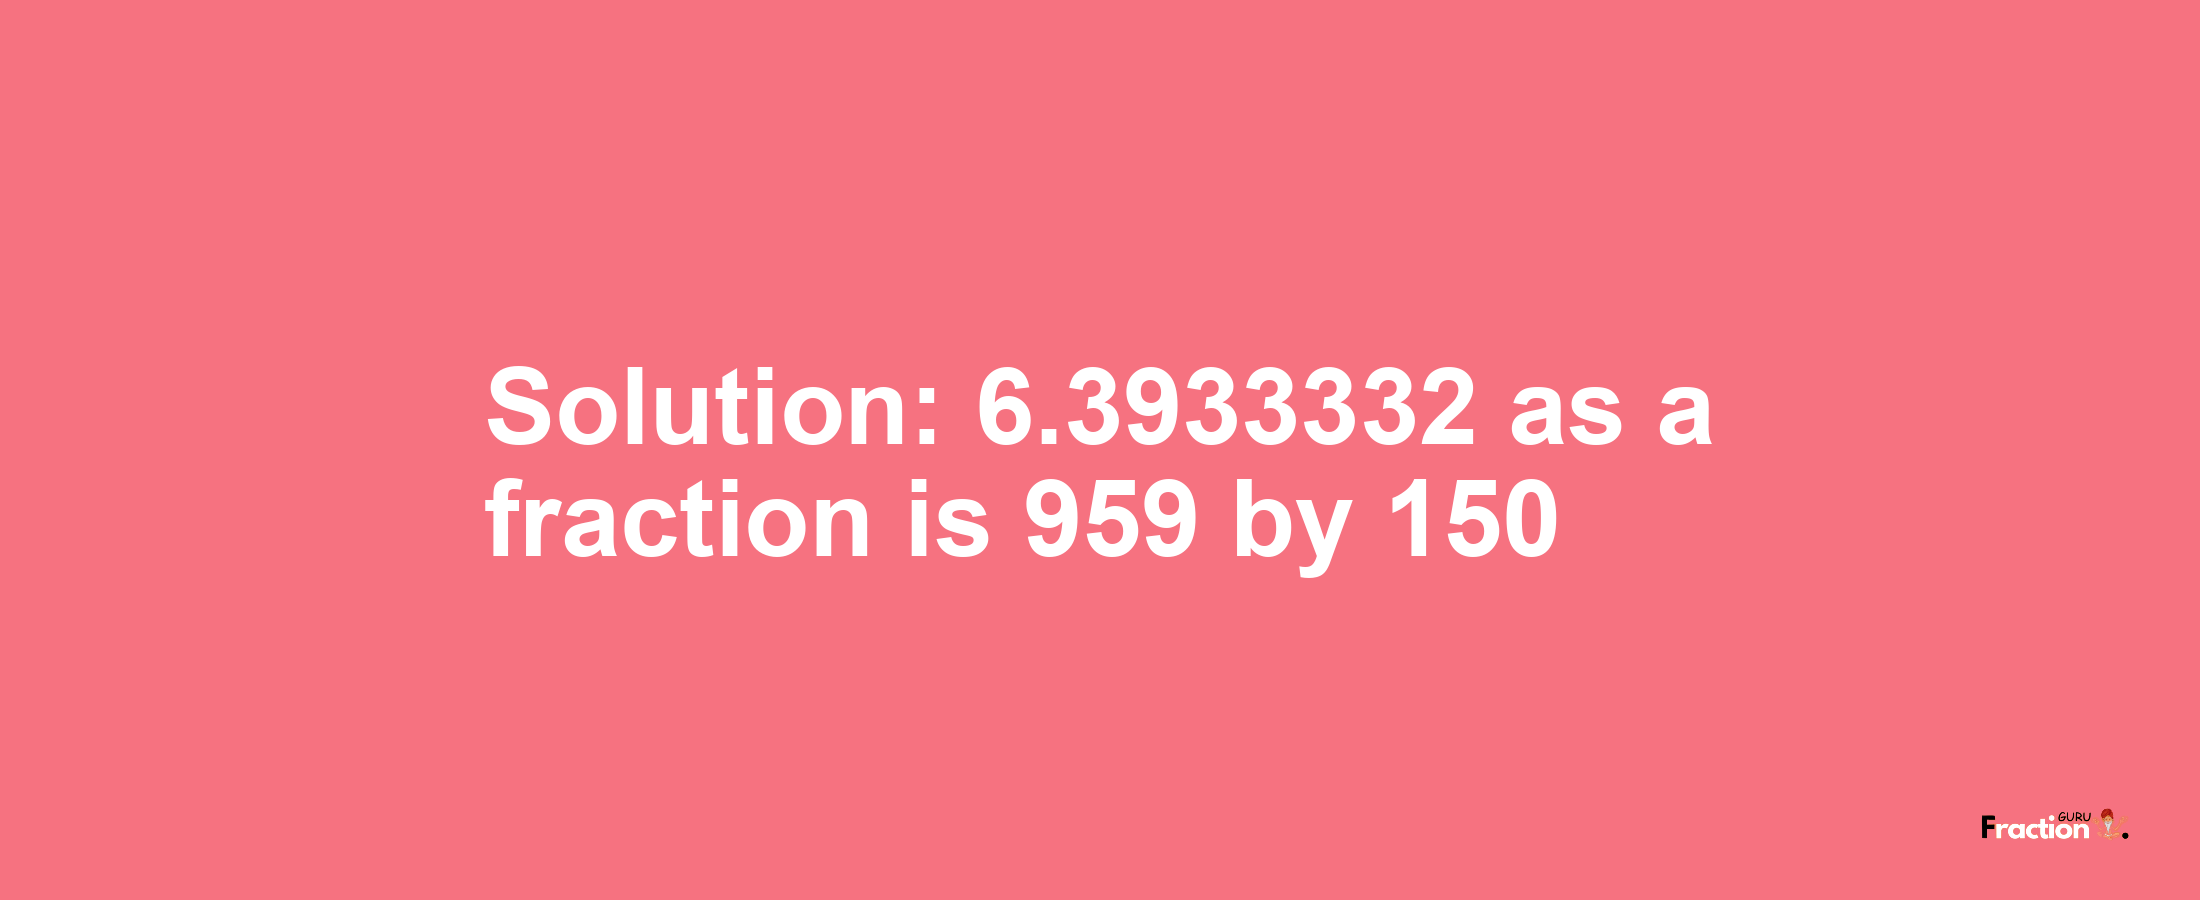 Solution:6.3933332 as a fraction is 959/150